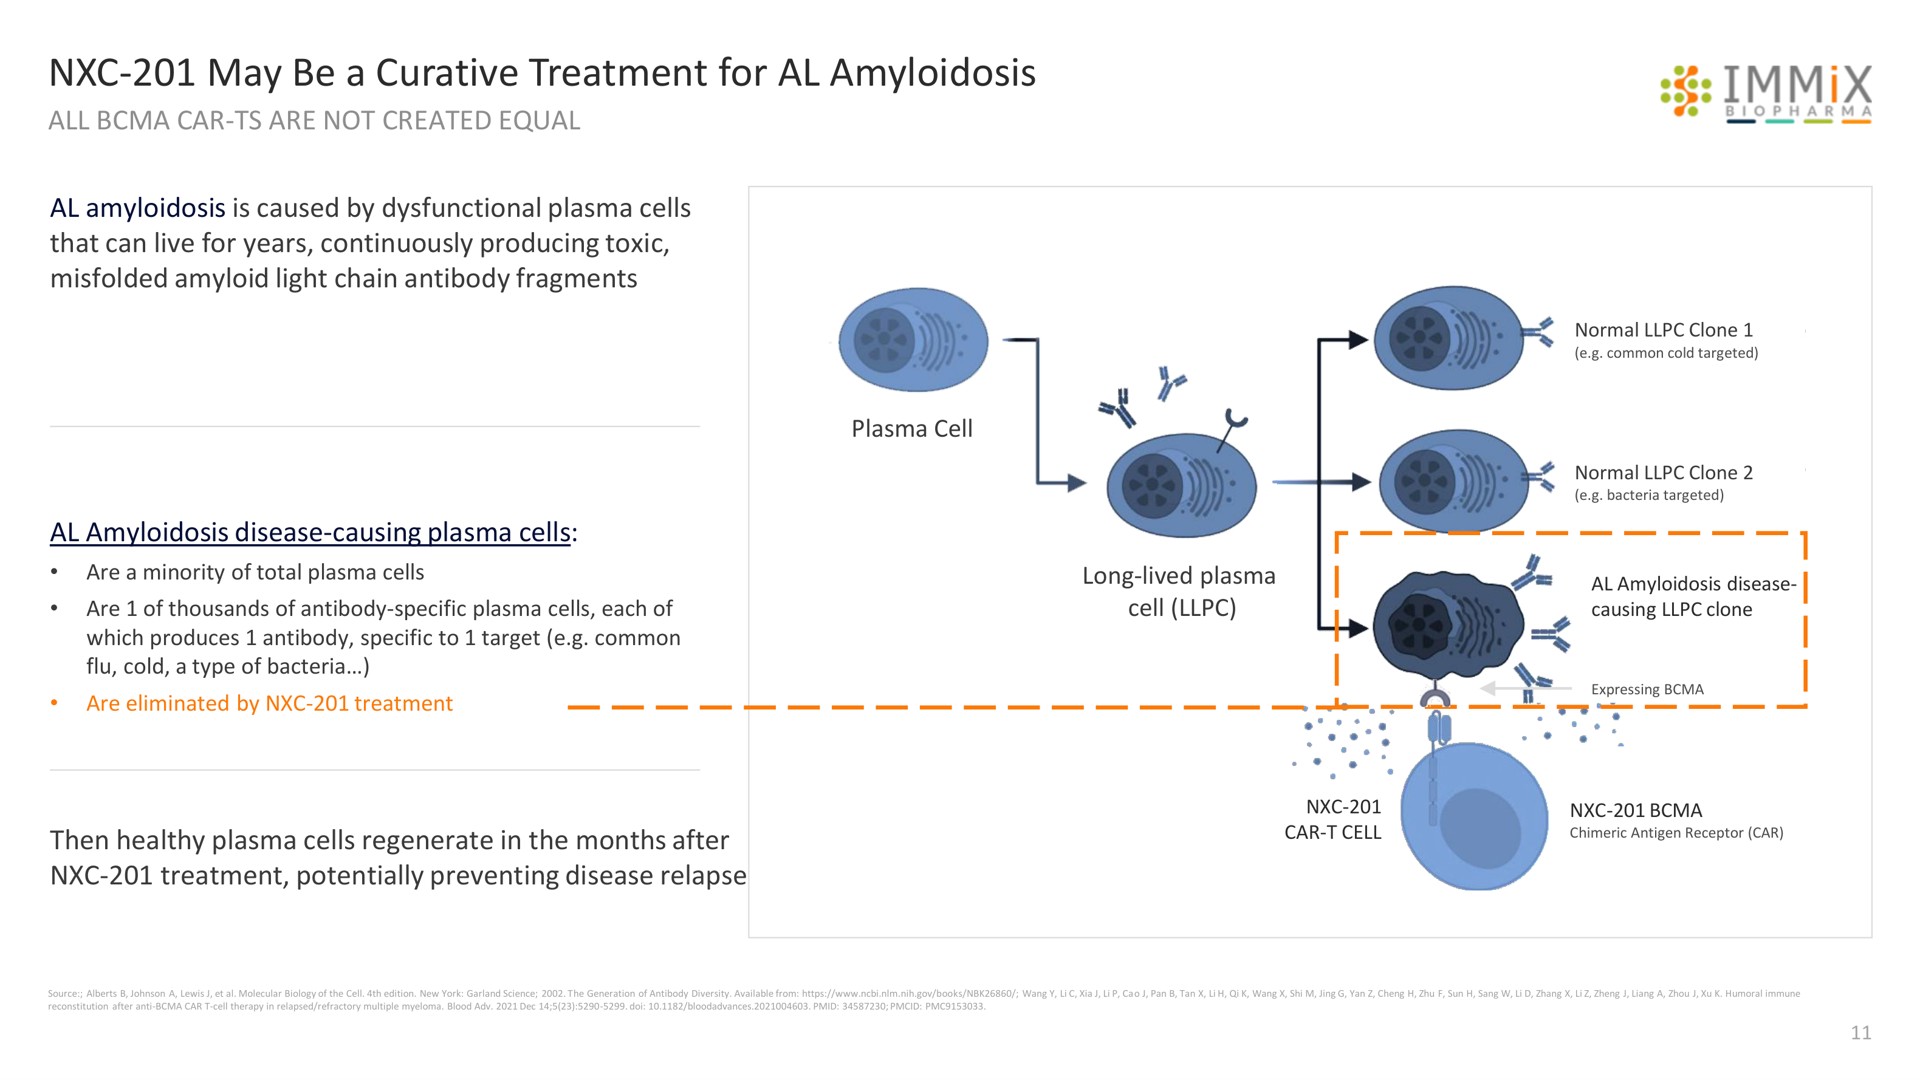 may be a curative treatment for amyloidosis all car are not created equal | Immix Biopharma